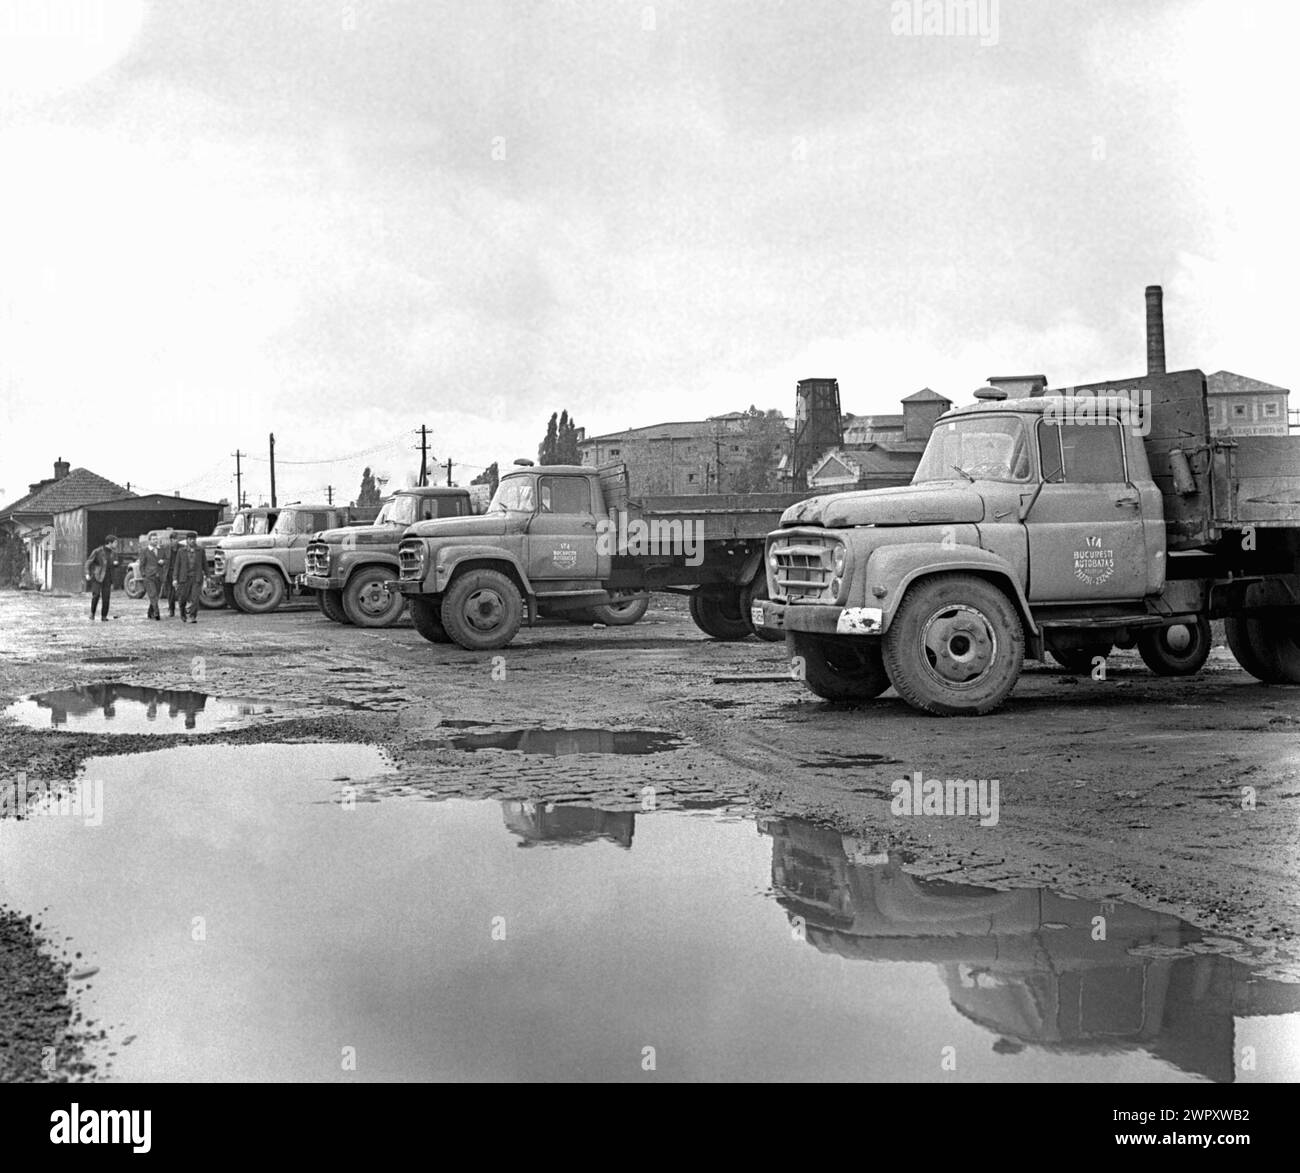 Trucks parked at a  State Agricultural Enterprise (I.A.S.) in communist Romania, in the 1970s Stock Photo